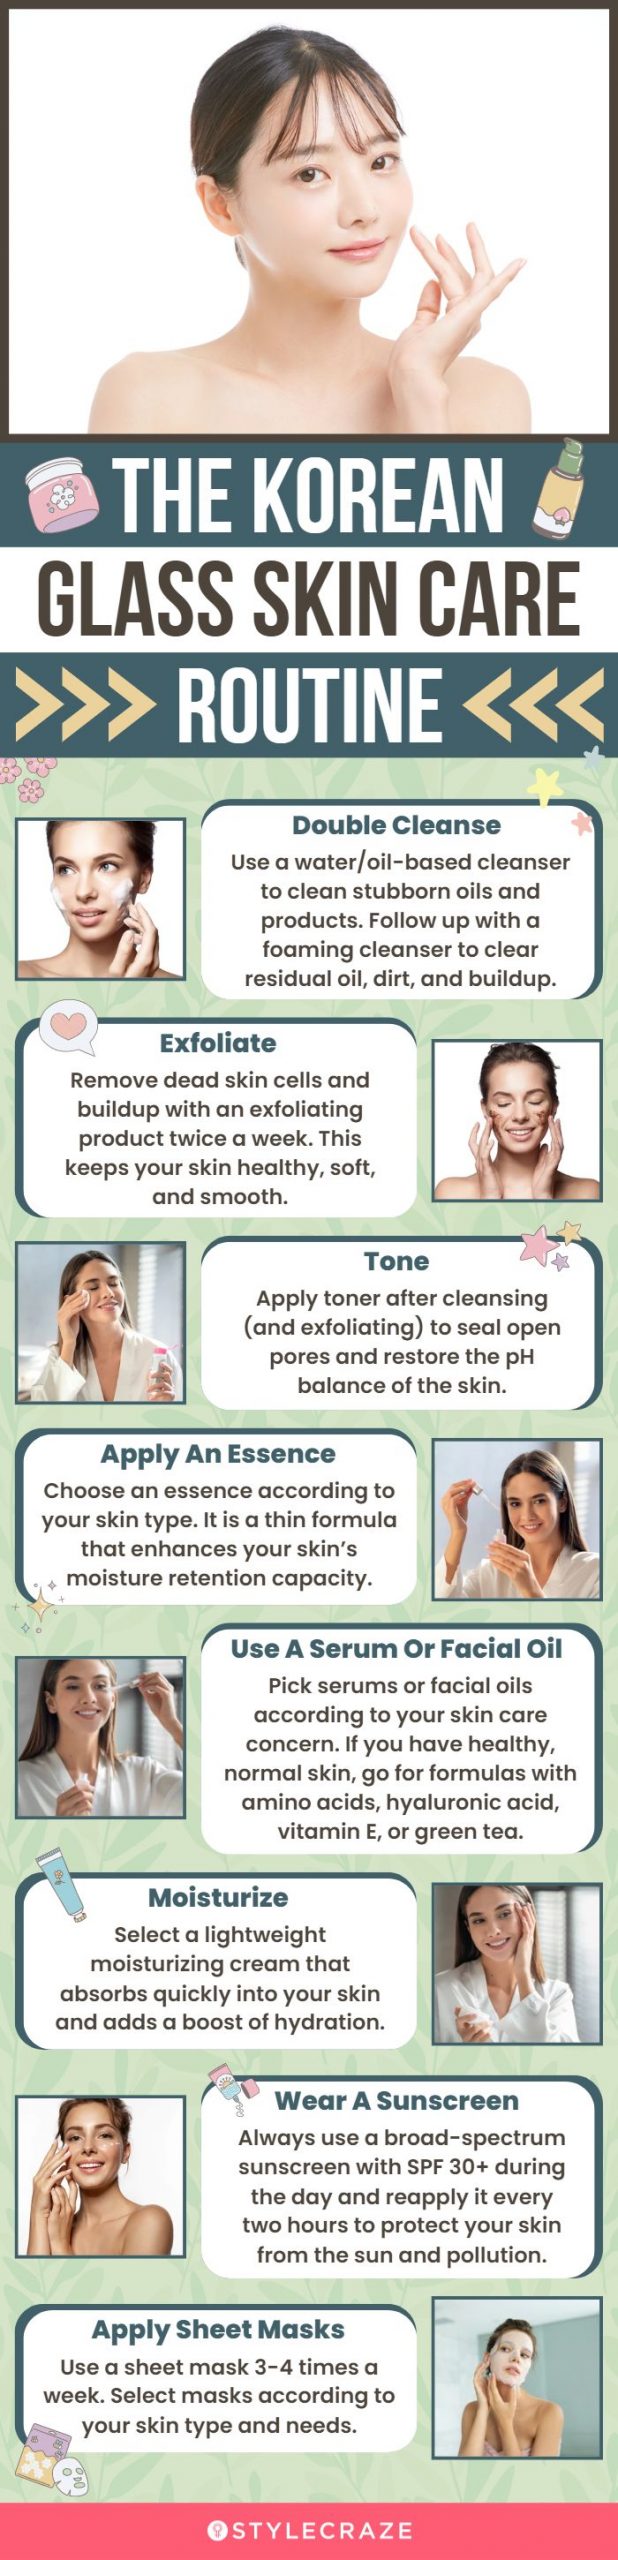 The Korean Glass Skin Care Routine (infographic)